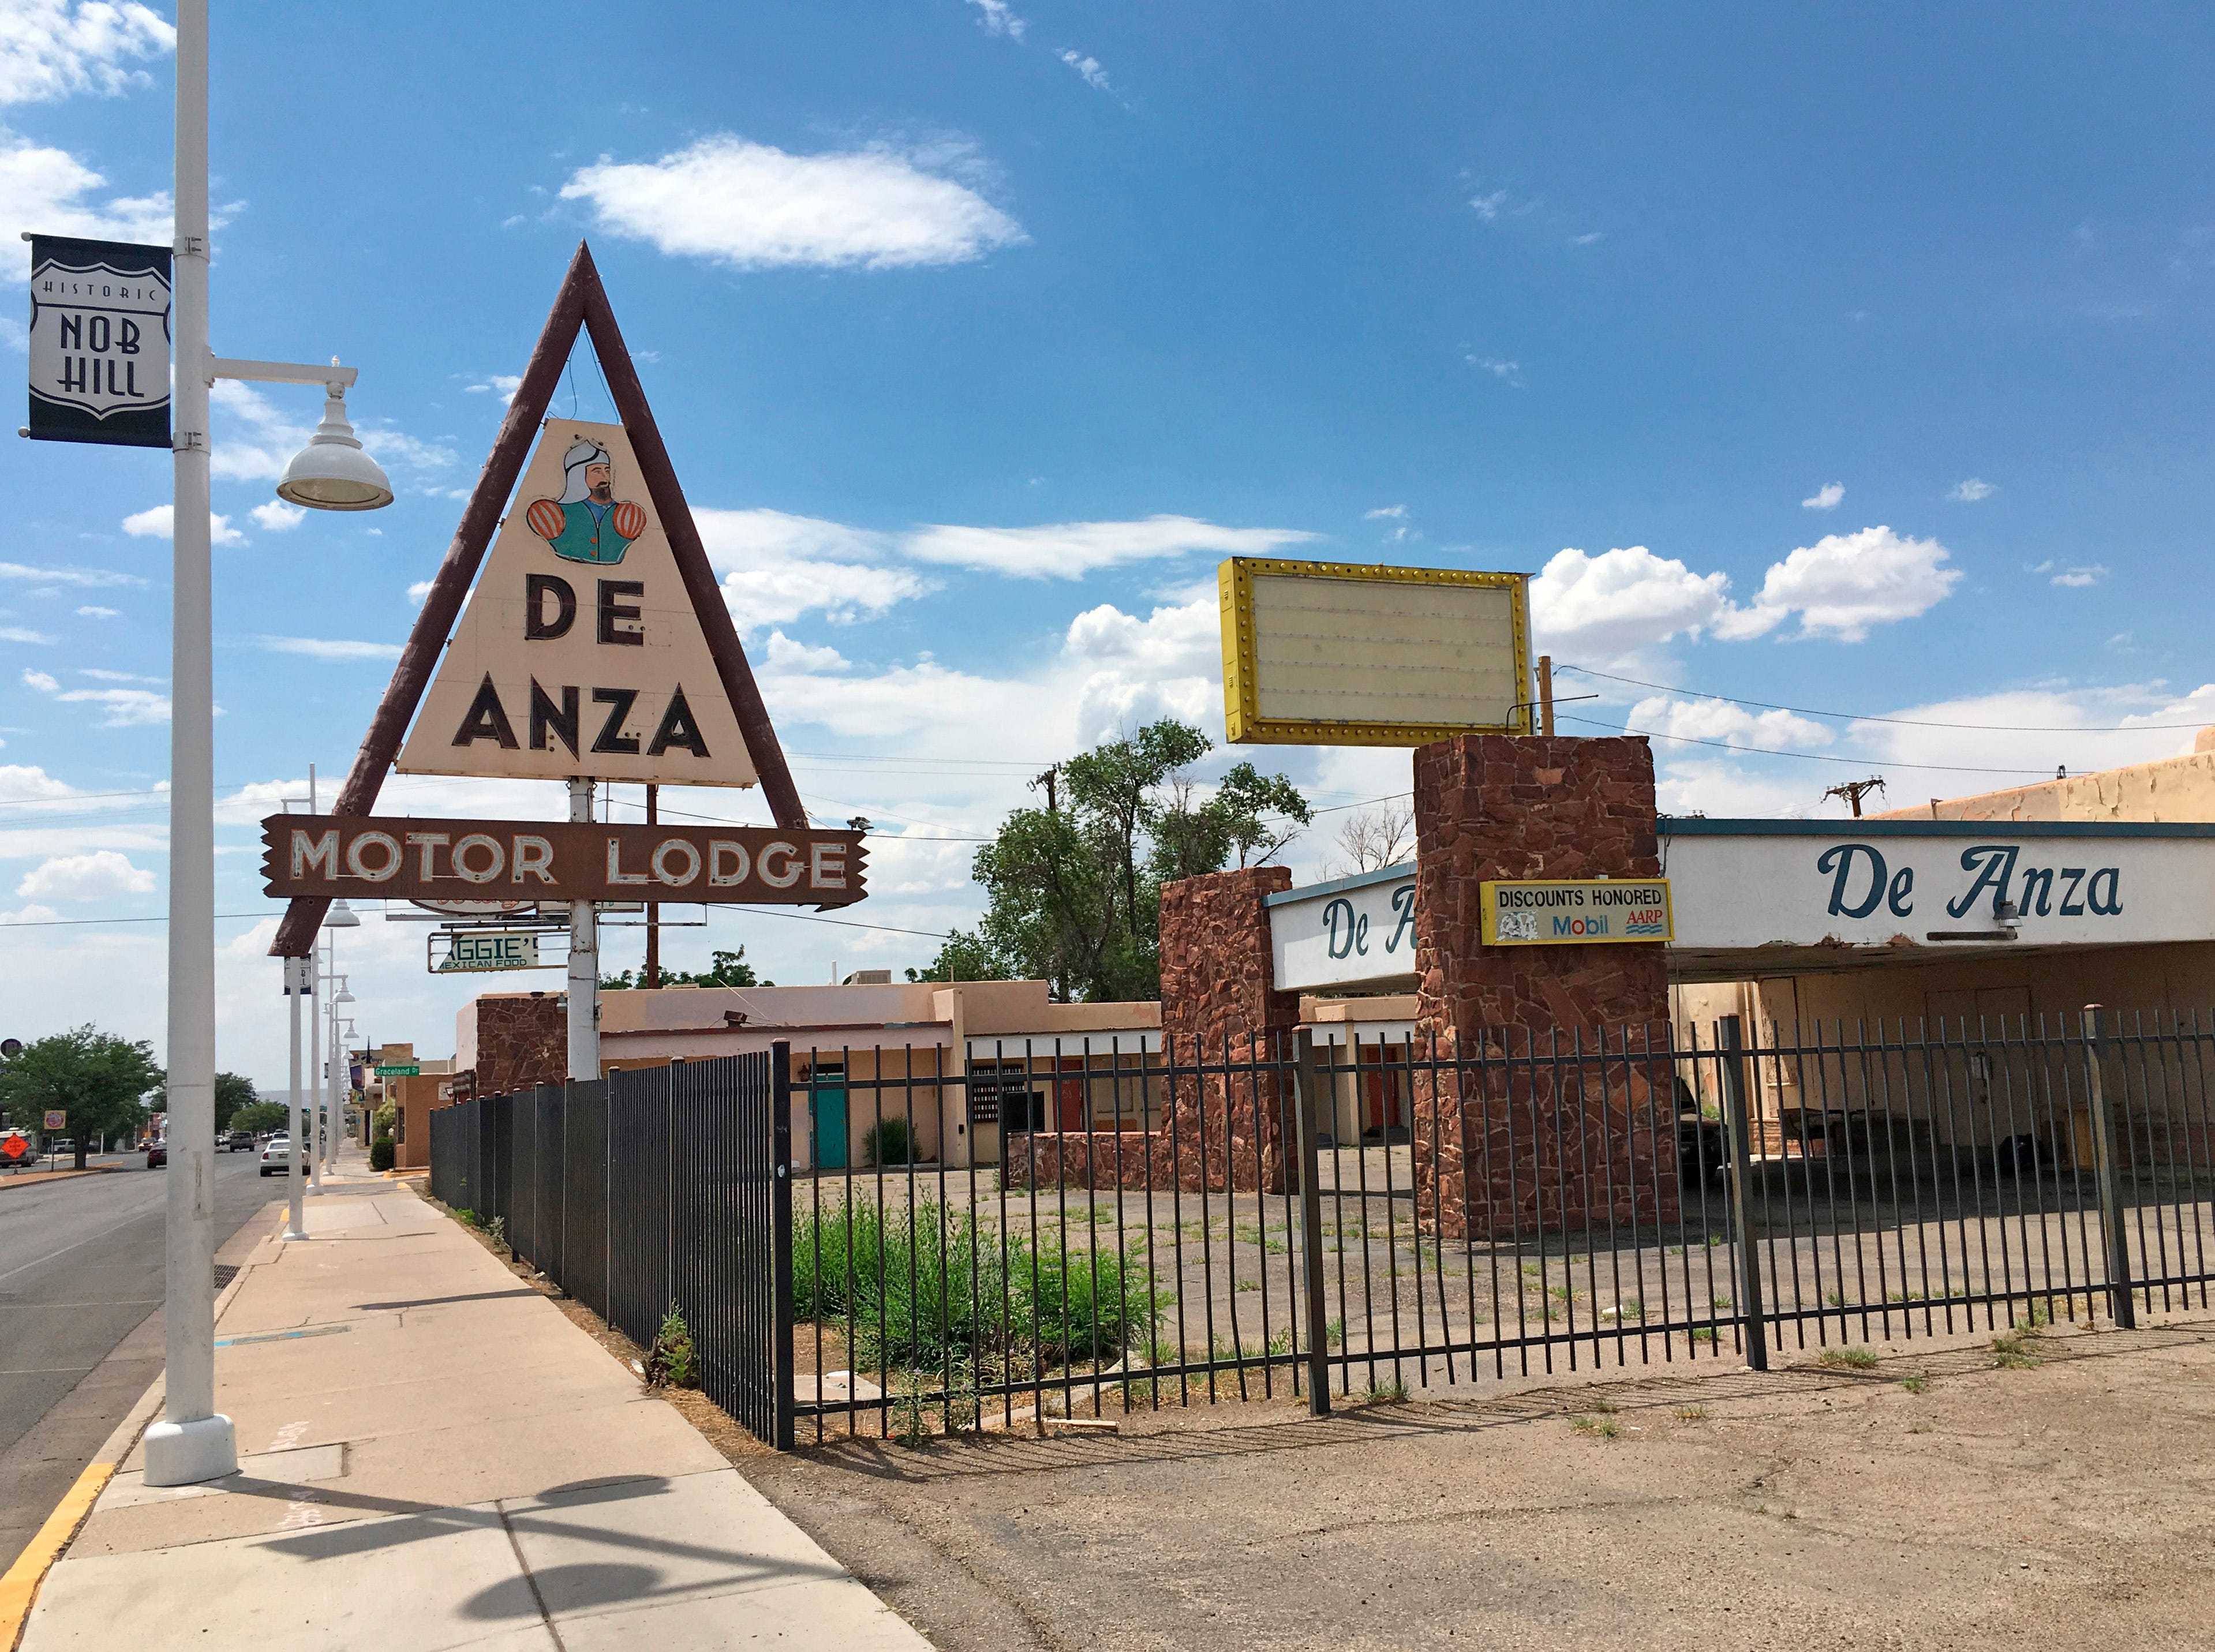 In this June 24, 2016, photo, the closed De Anza Motor Lodge sits along Route 66 in Albuquerque, Nex Mexico, and recently has been highlighted as one of the few places that allowed black travelers to stay during segregated times.